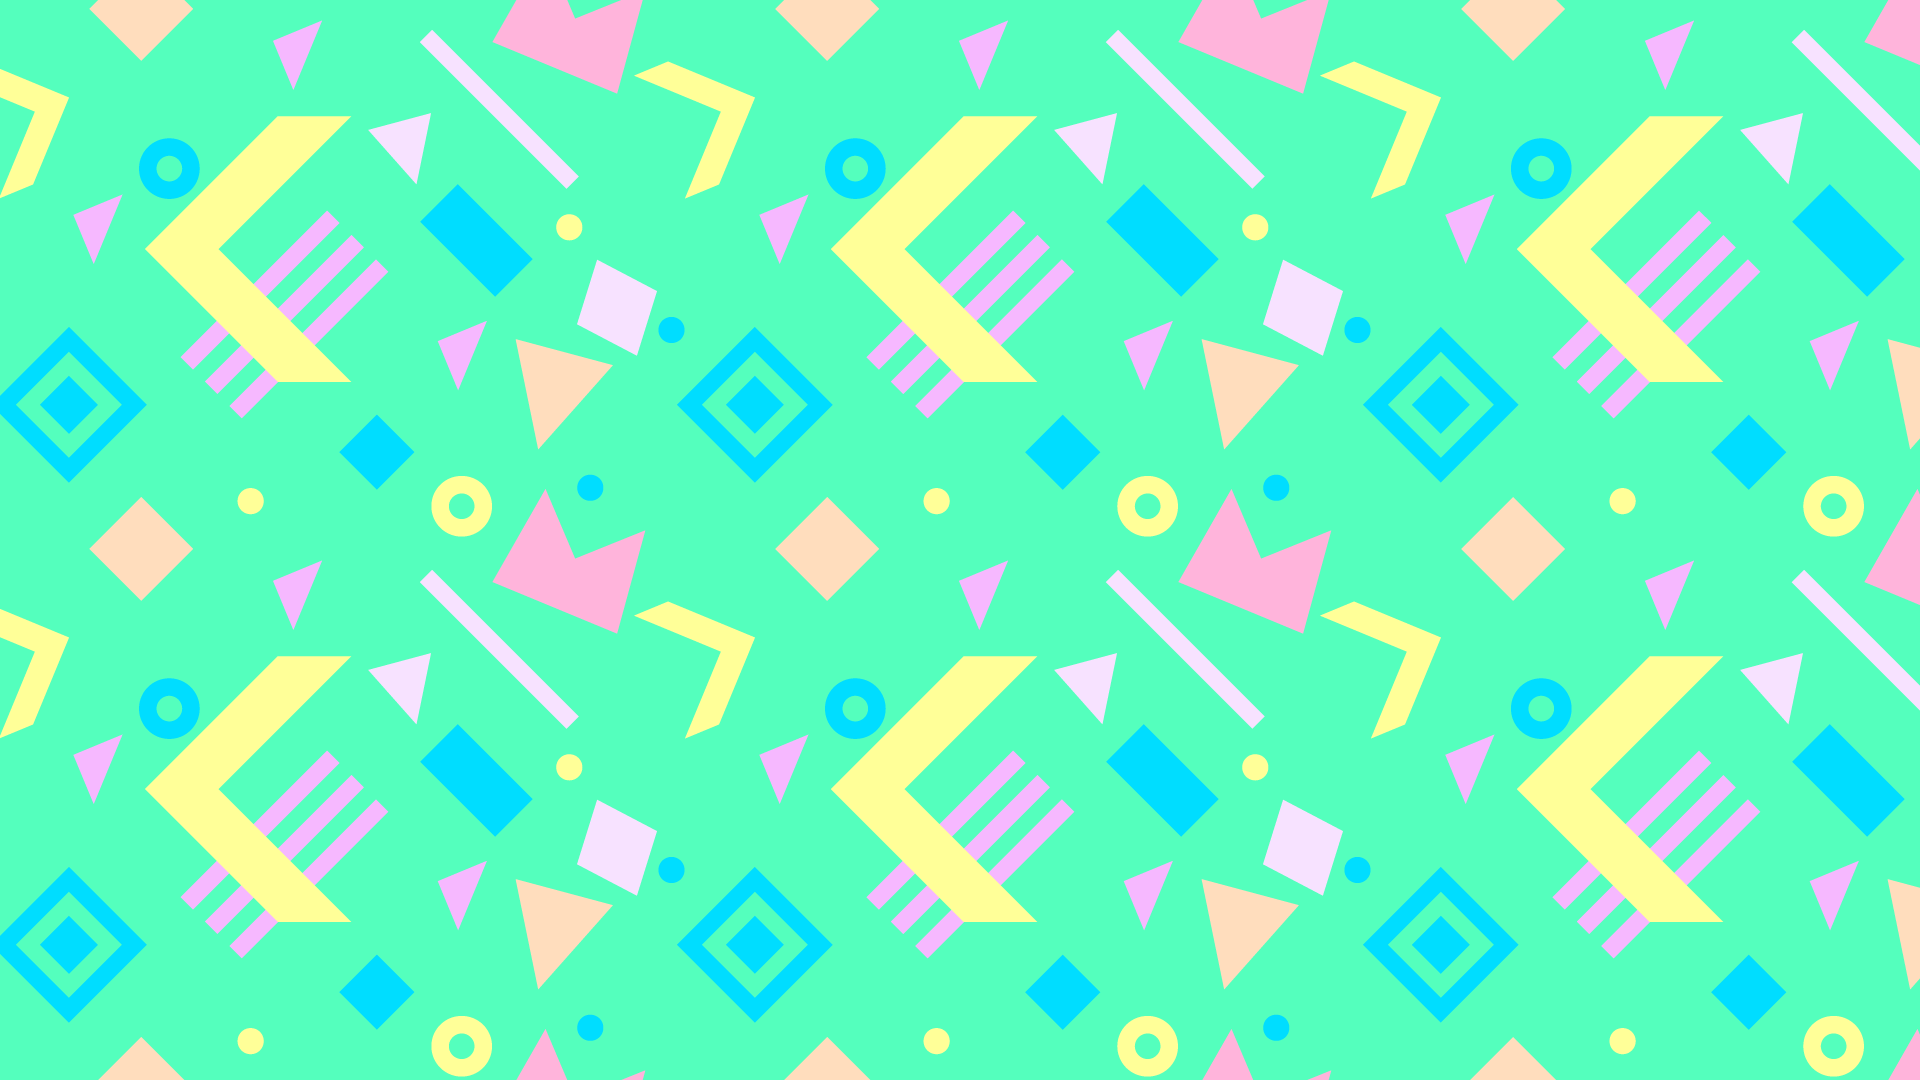 General 1920x1080 Mozilla Firefox 1990s artwork pattern green turquoise colorful